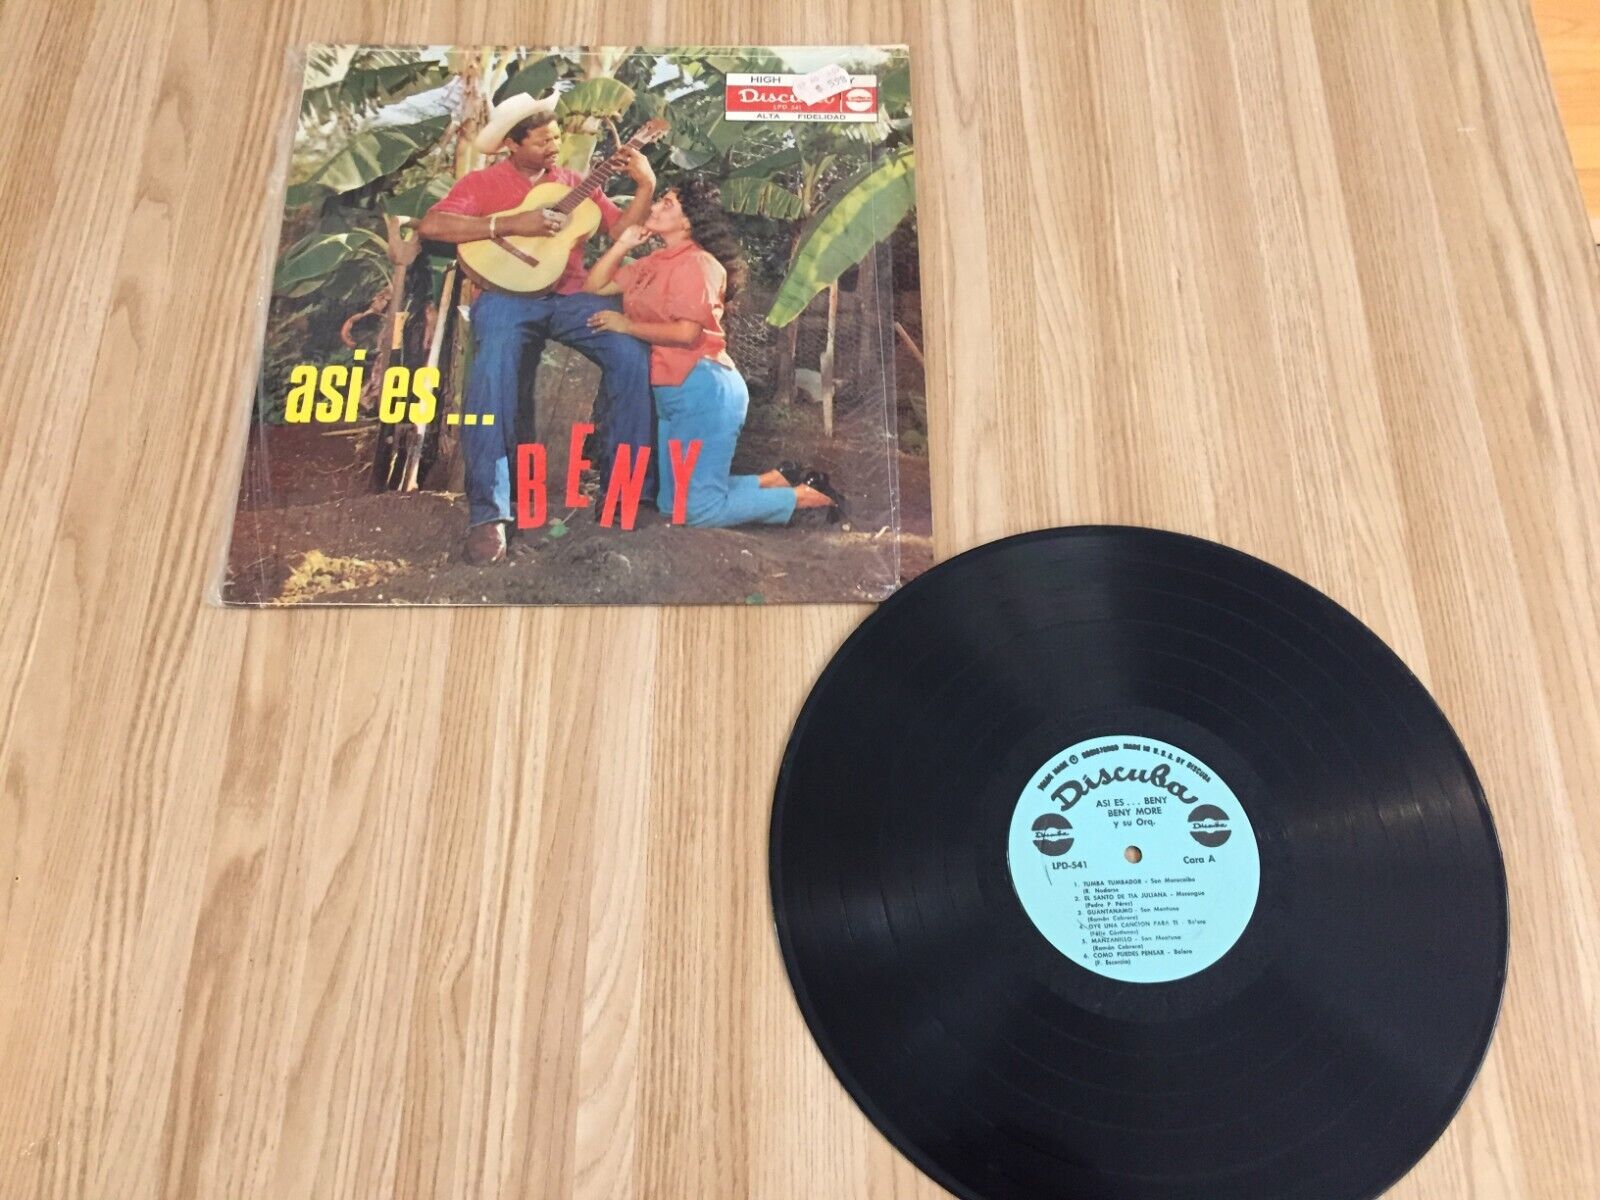 Beny More Asi Es Beny Discuba LPD 541 VG++ in shrink play tested